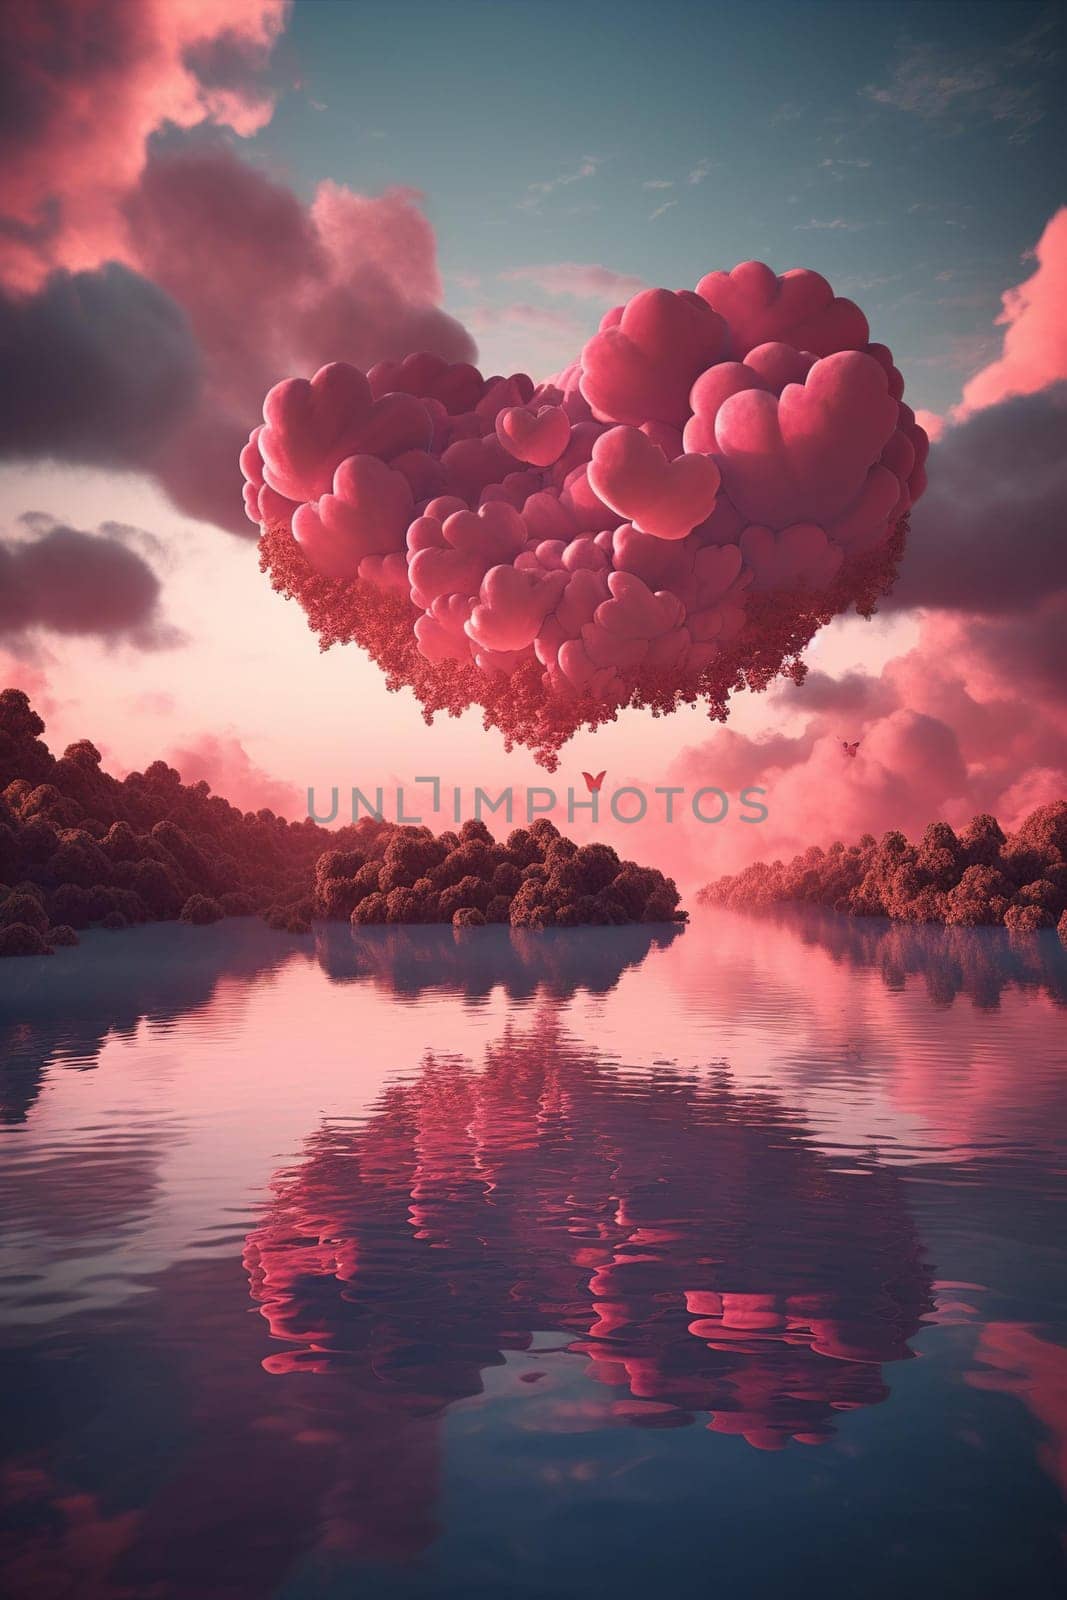 Amazing Landscape View With Pink Cloud In Heart Shape by tan4ikk1